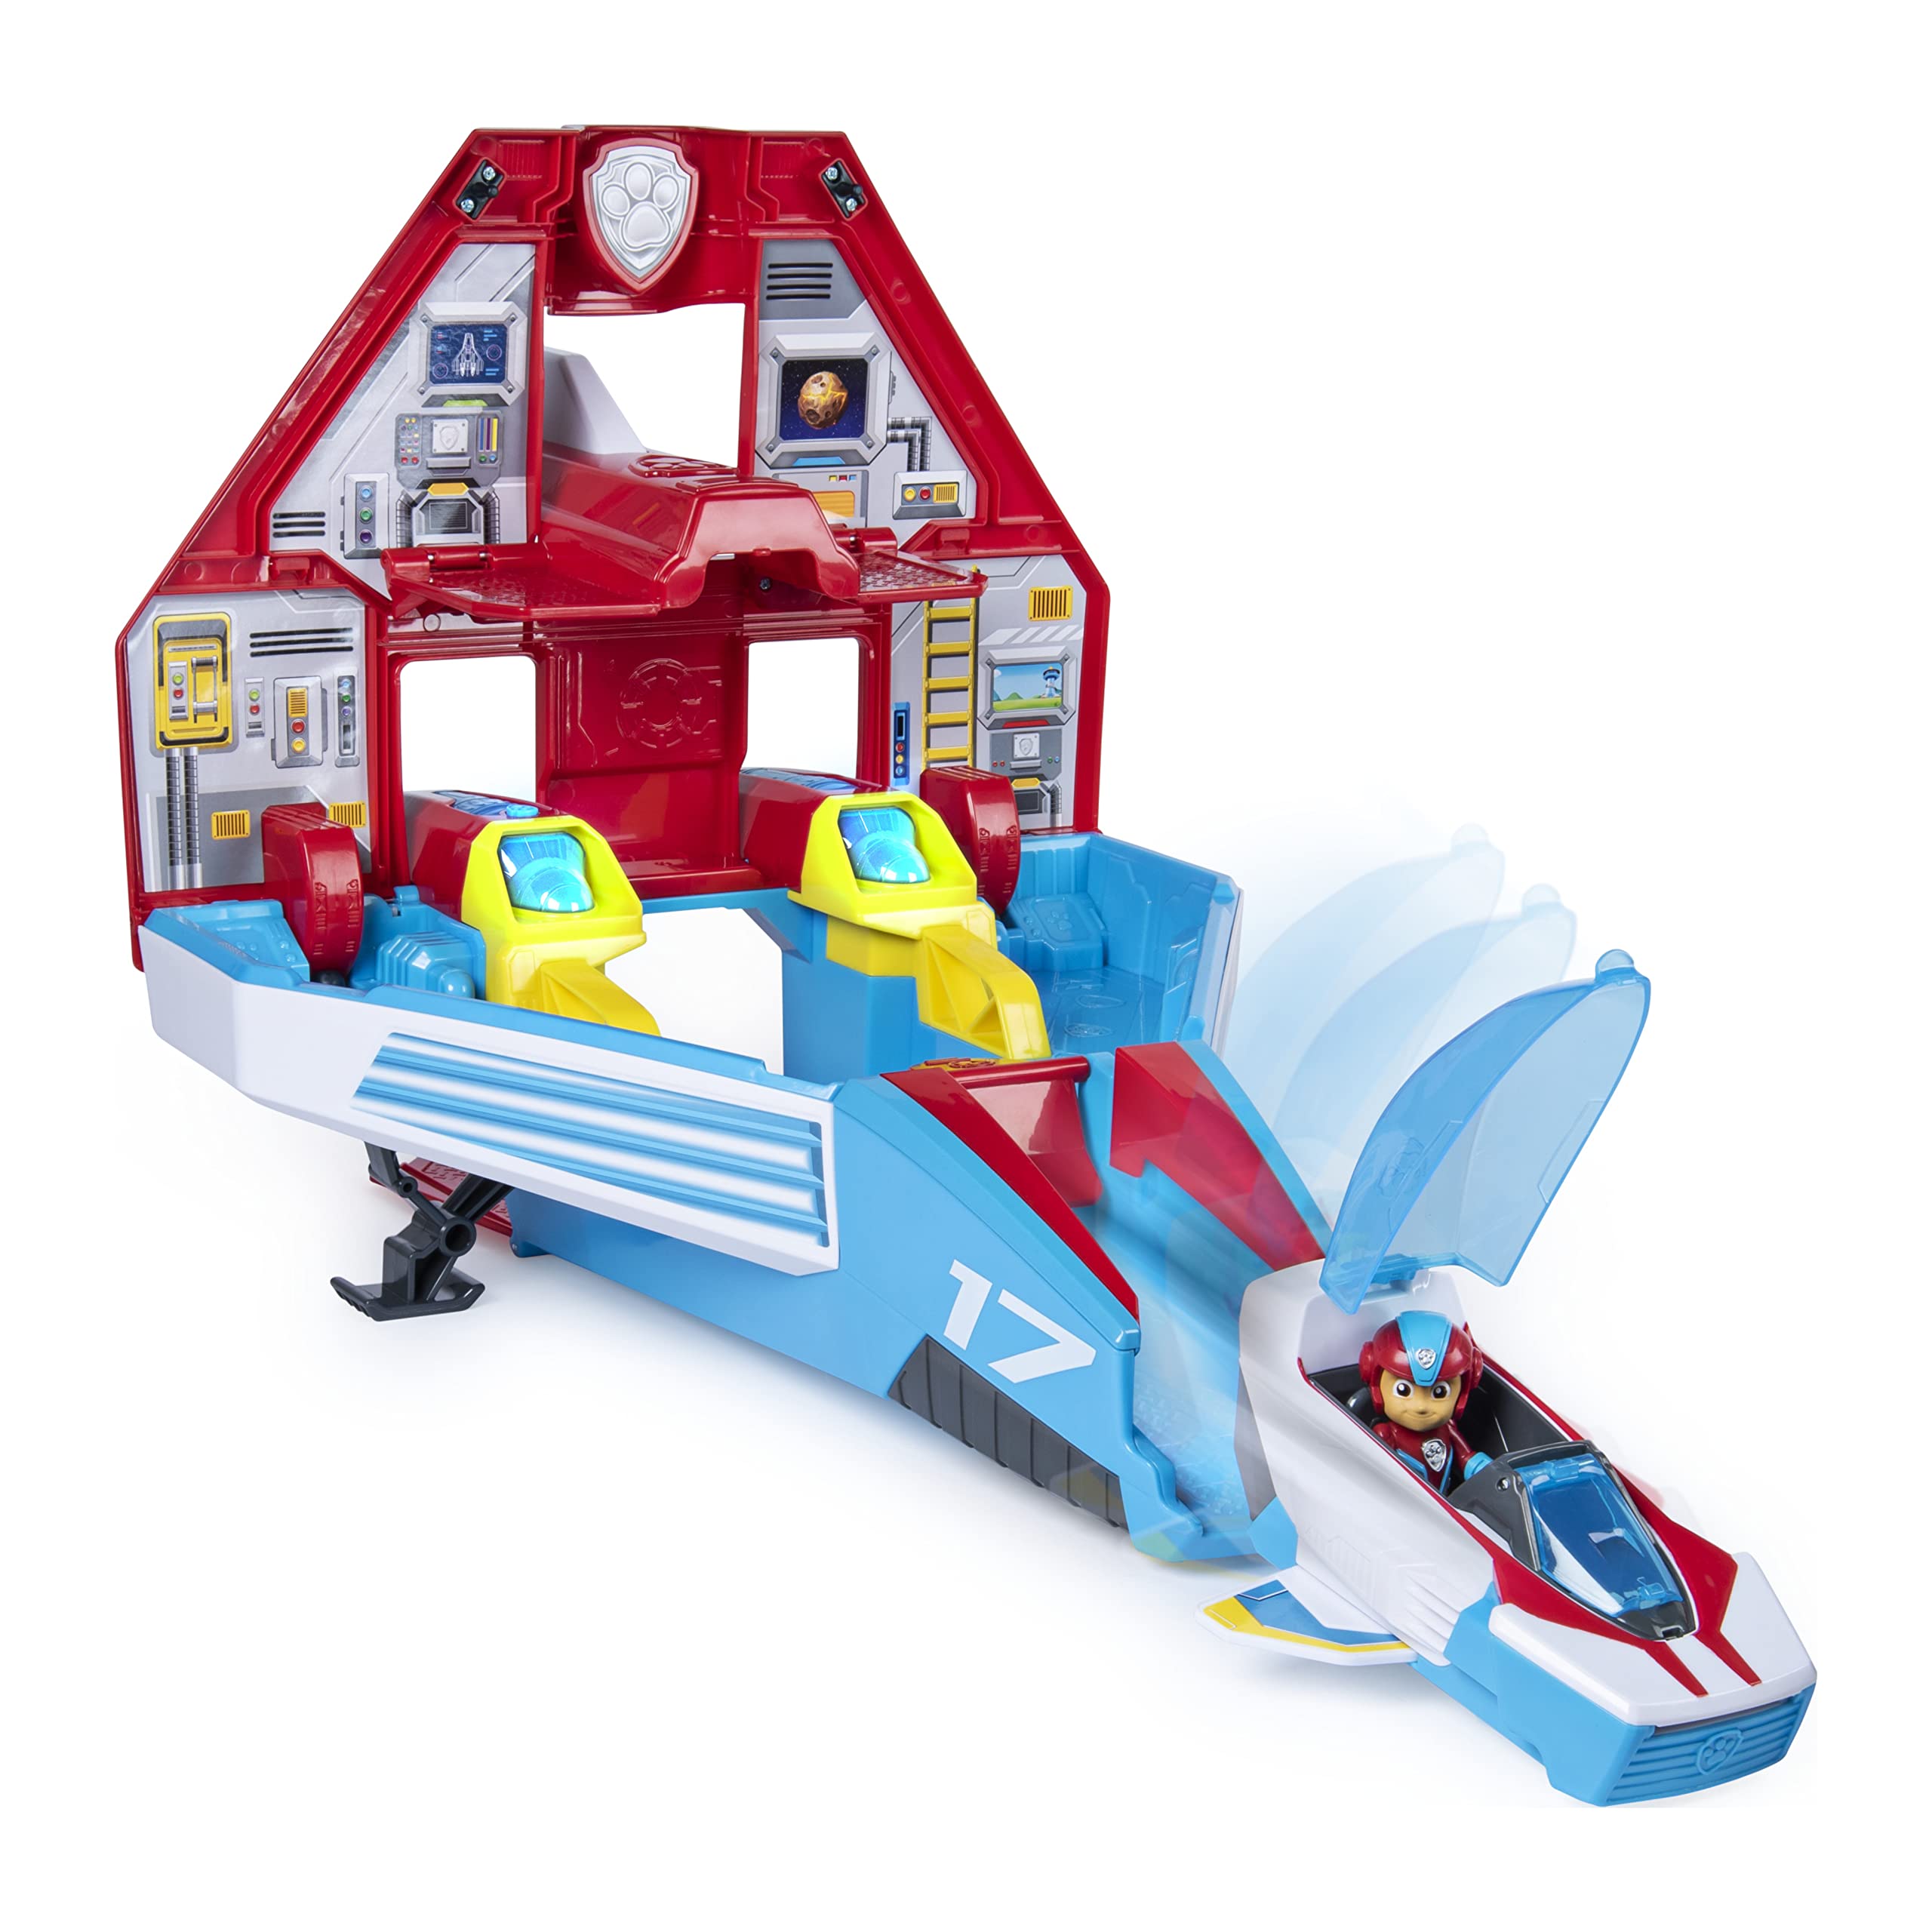 Paw Patrol, Super Paws, 2-in-1 Transforming Mighty Pups Jet Command Center with Lights and Sounds